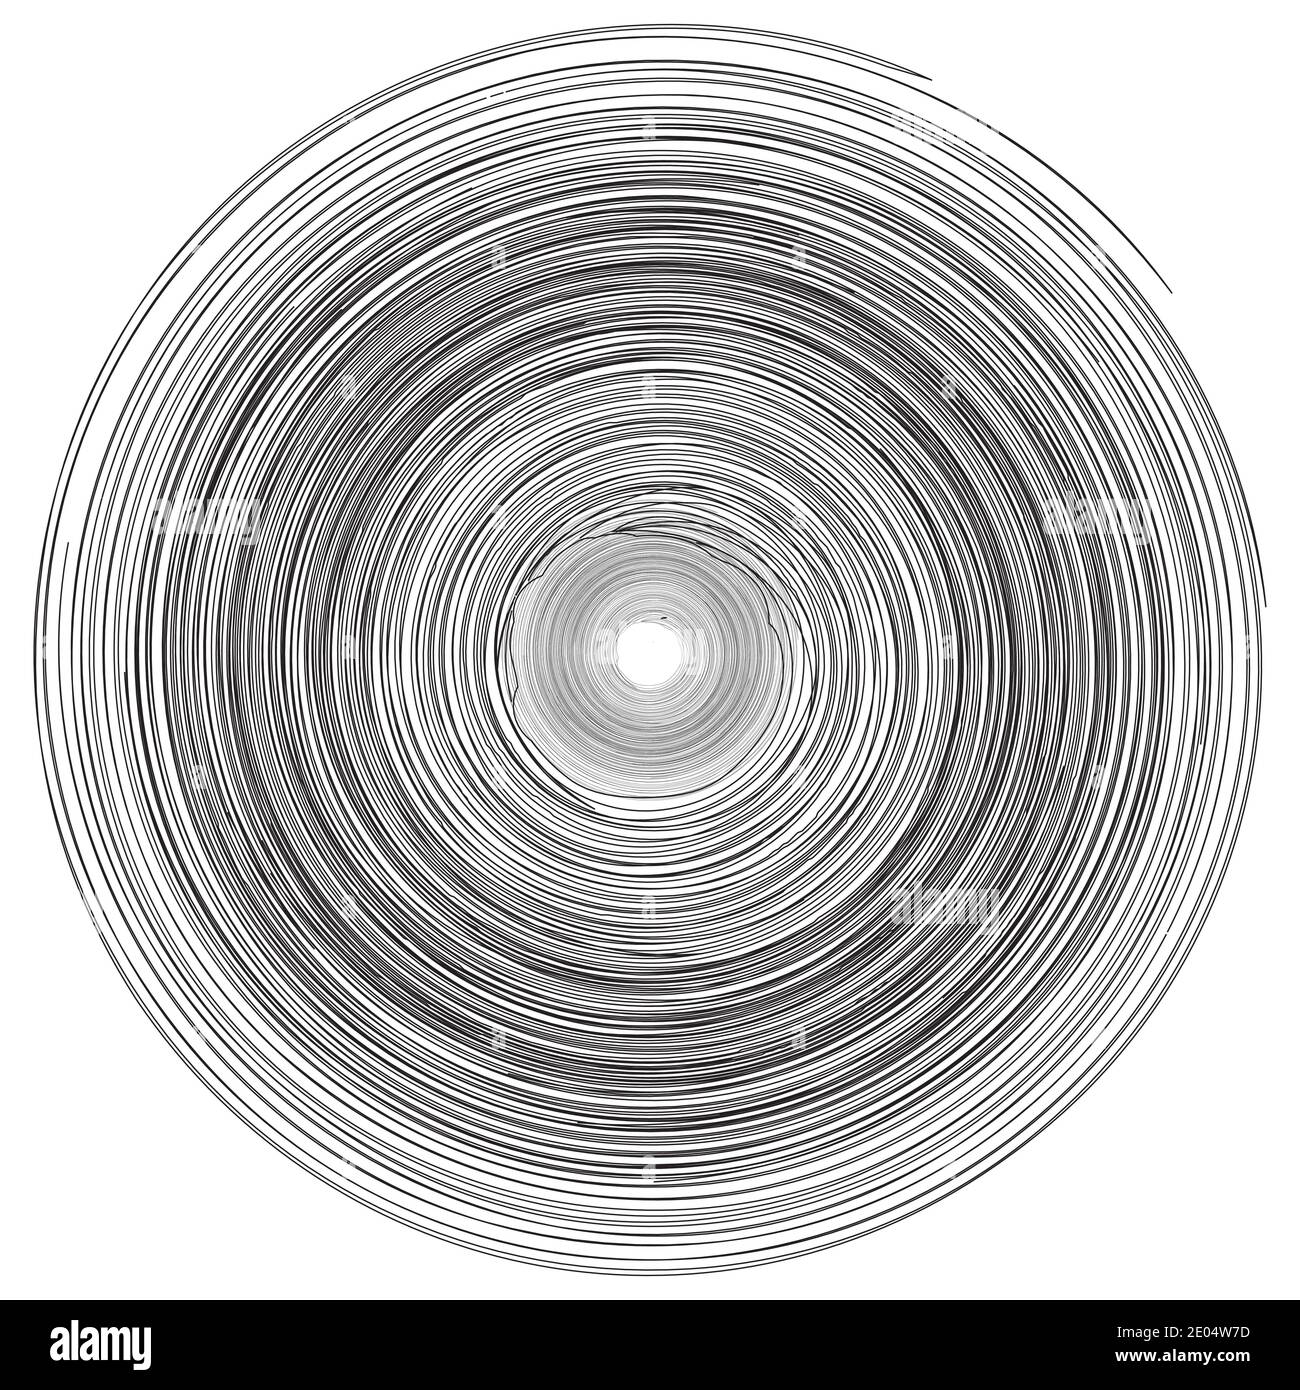 Concentric rings circles pattern abstract monochrome element, vortex whirlpool vector Stock Vector